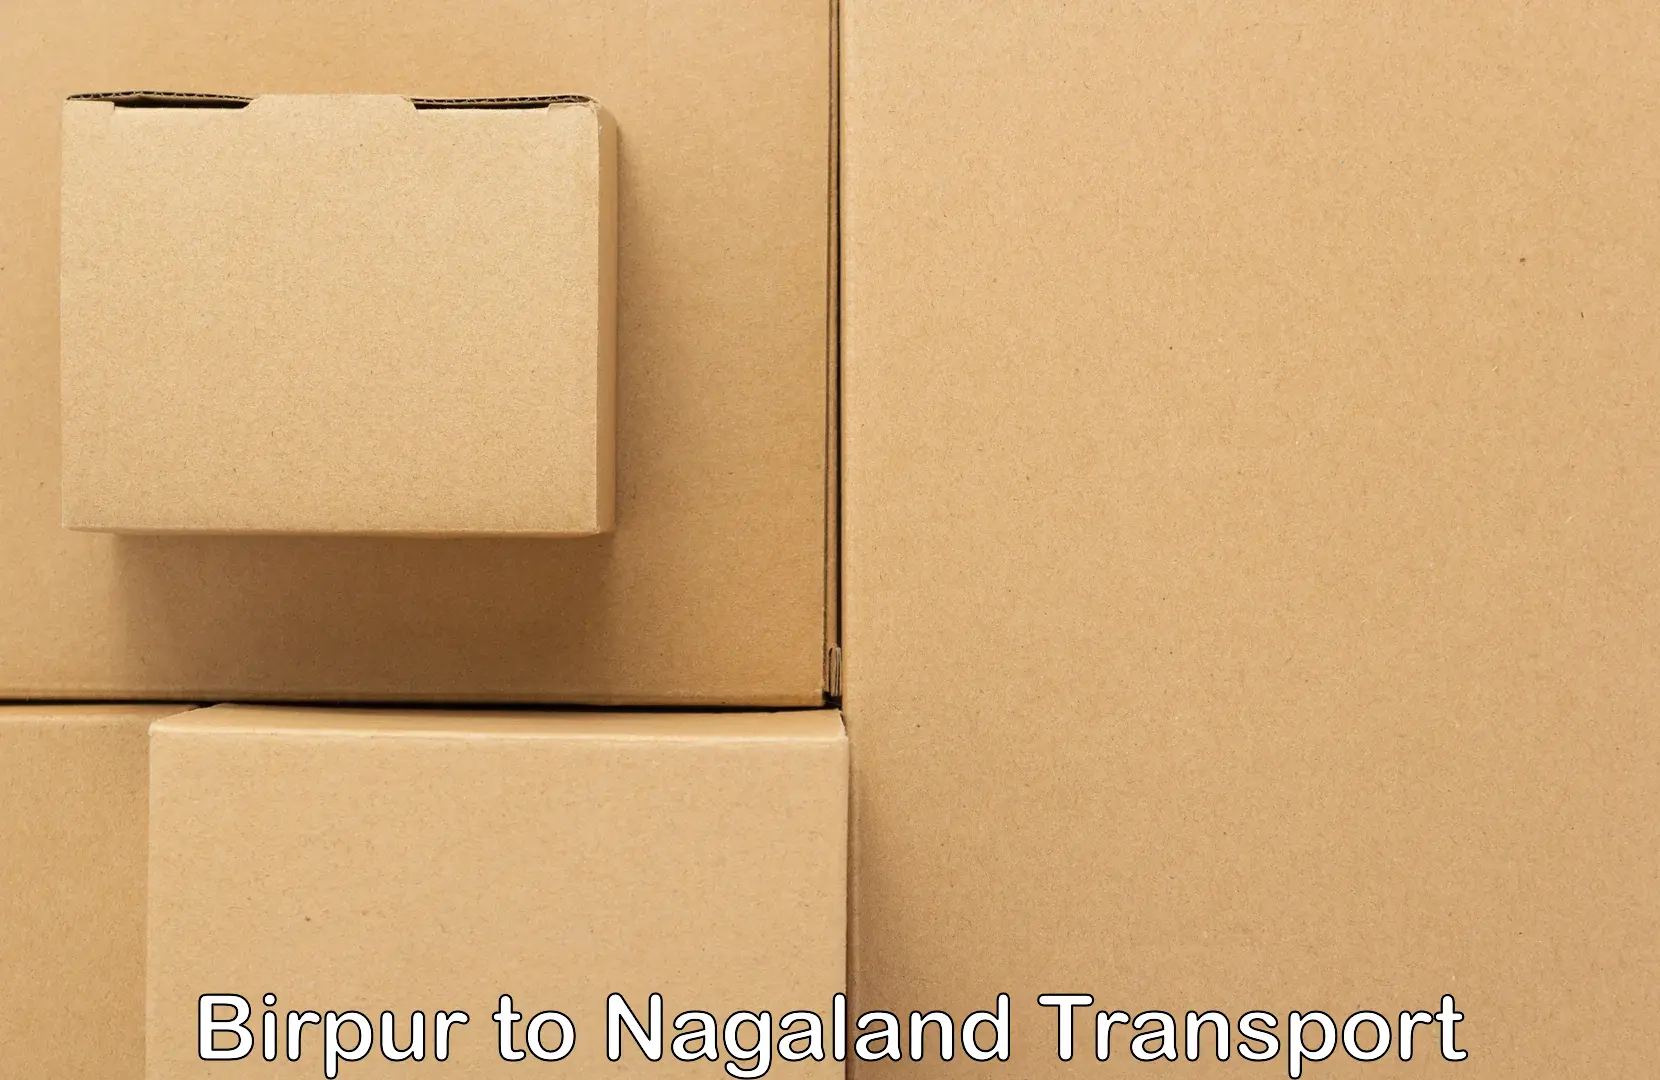 Commercial transport service Birpur to Nagaland